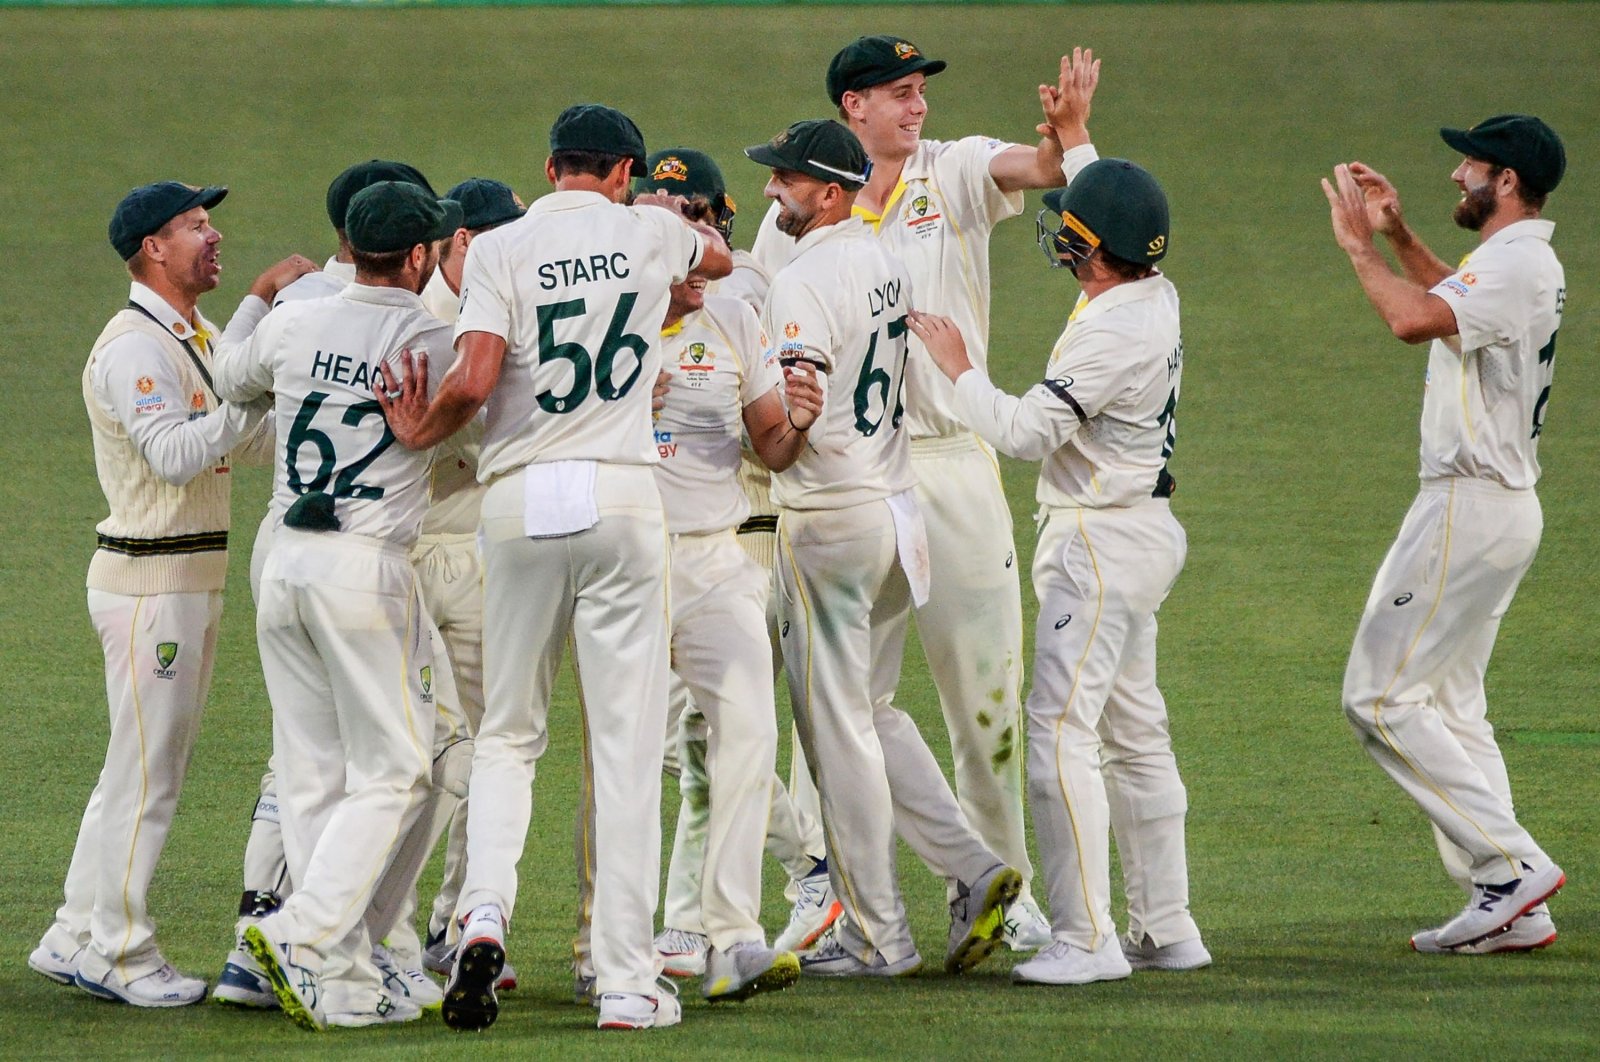 Australian players celebrate their win over England in the second Test in Adelaide, Australia, Dec. 20, 2021. (AFP Photo)